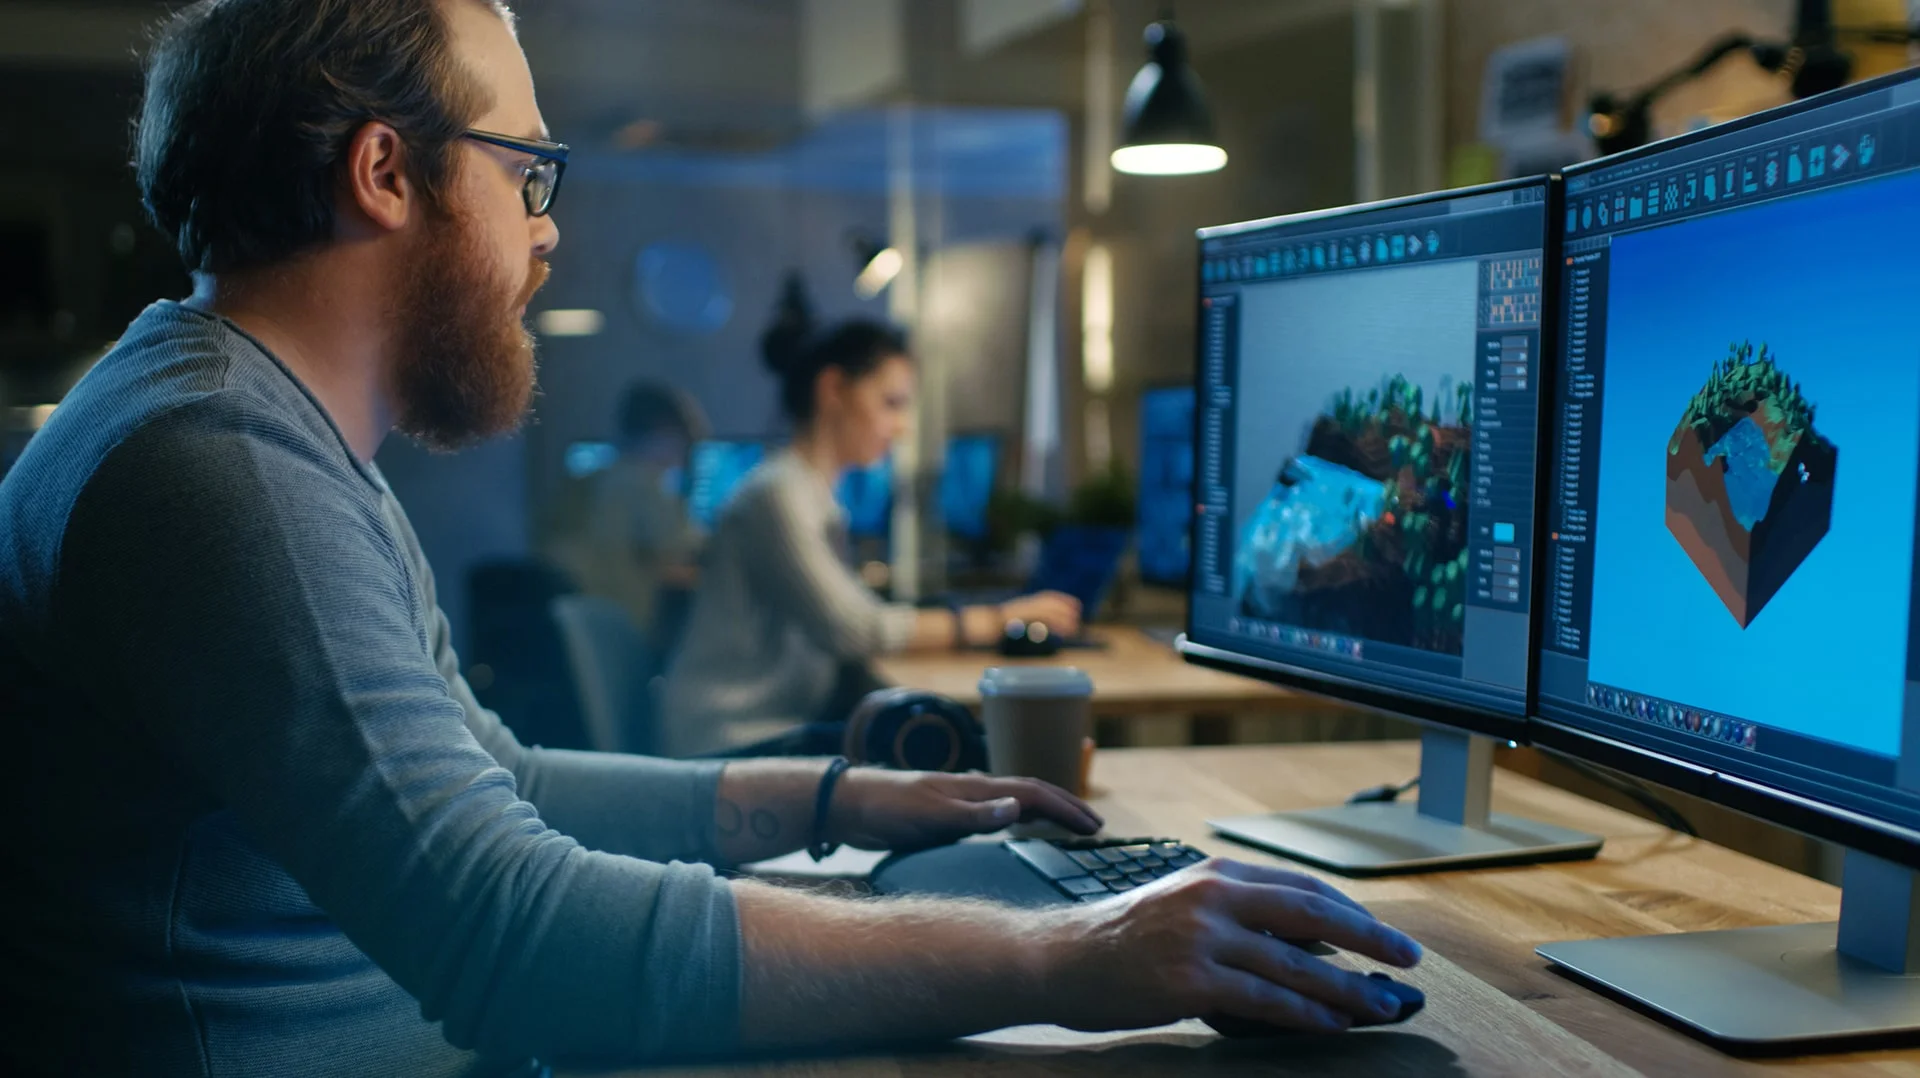 7. 6 Skills You need to thrive as a Game Developer Polydin